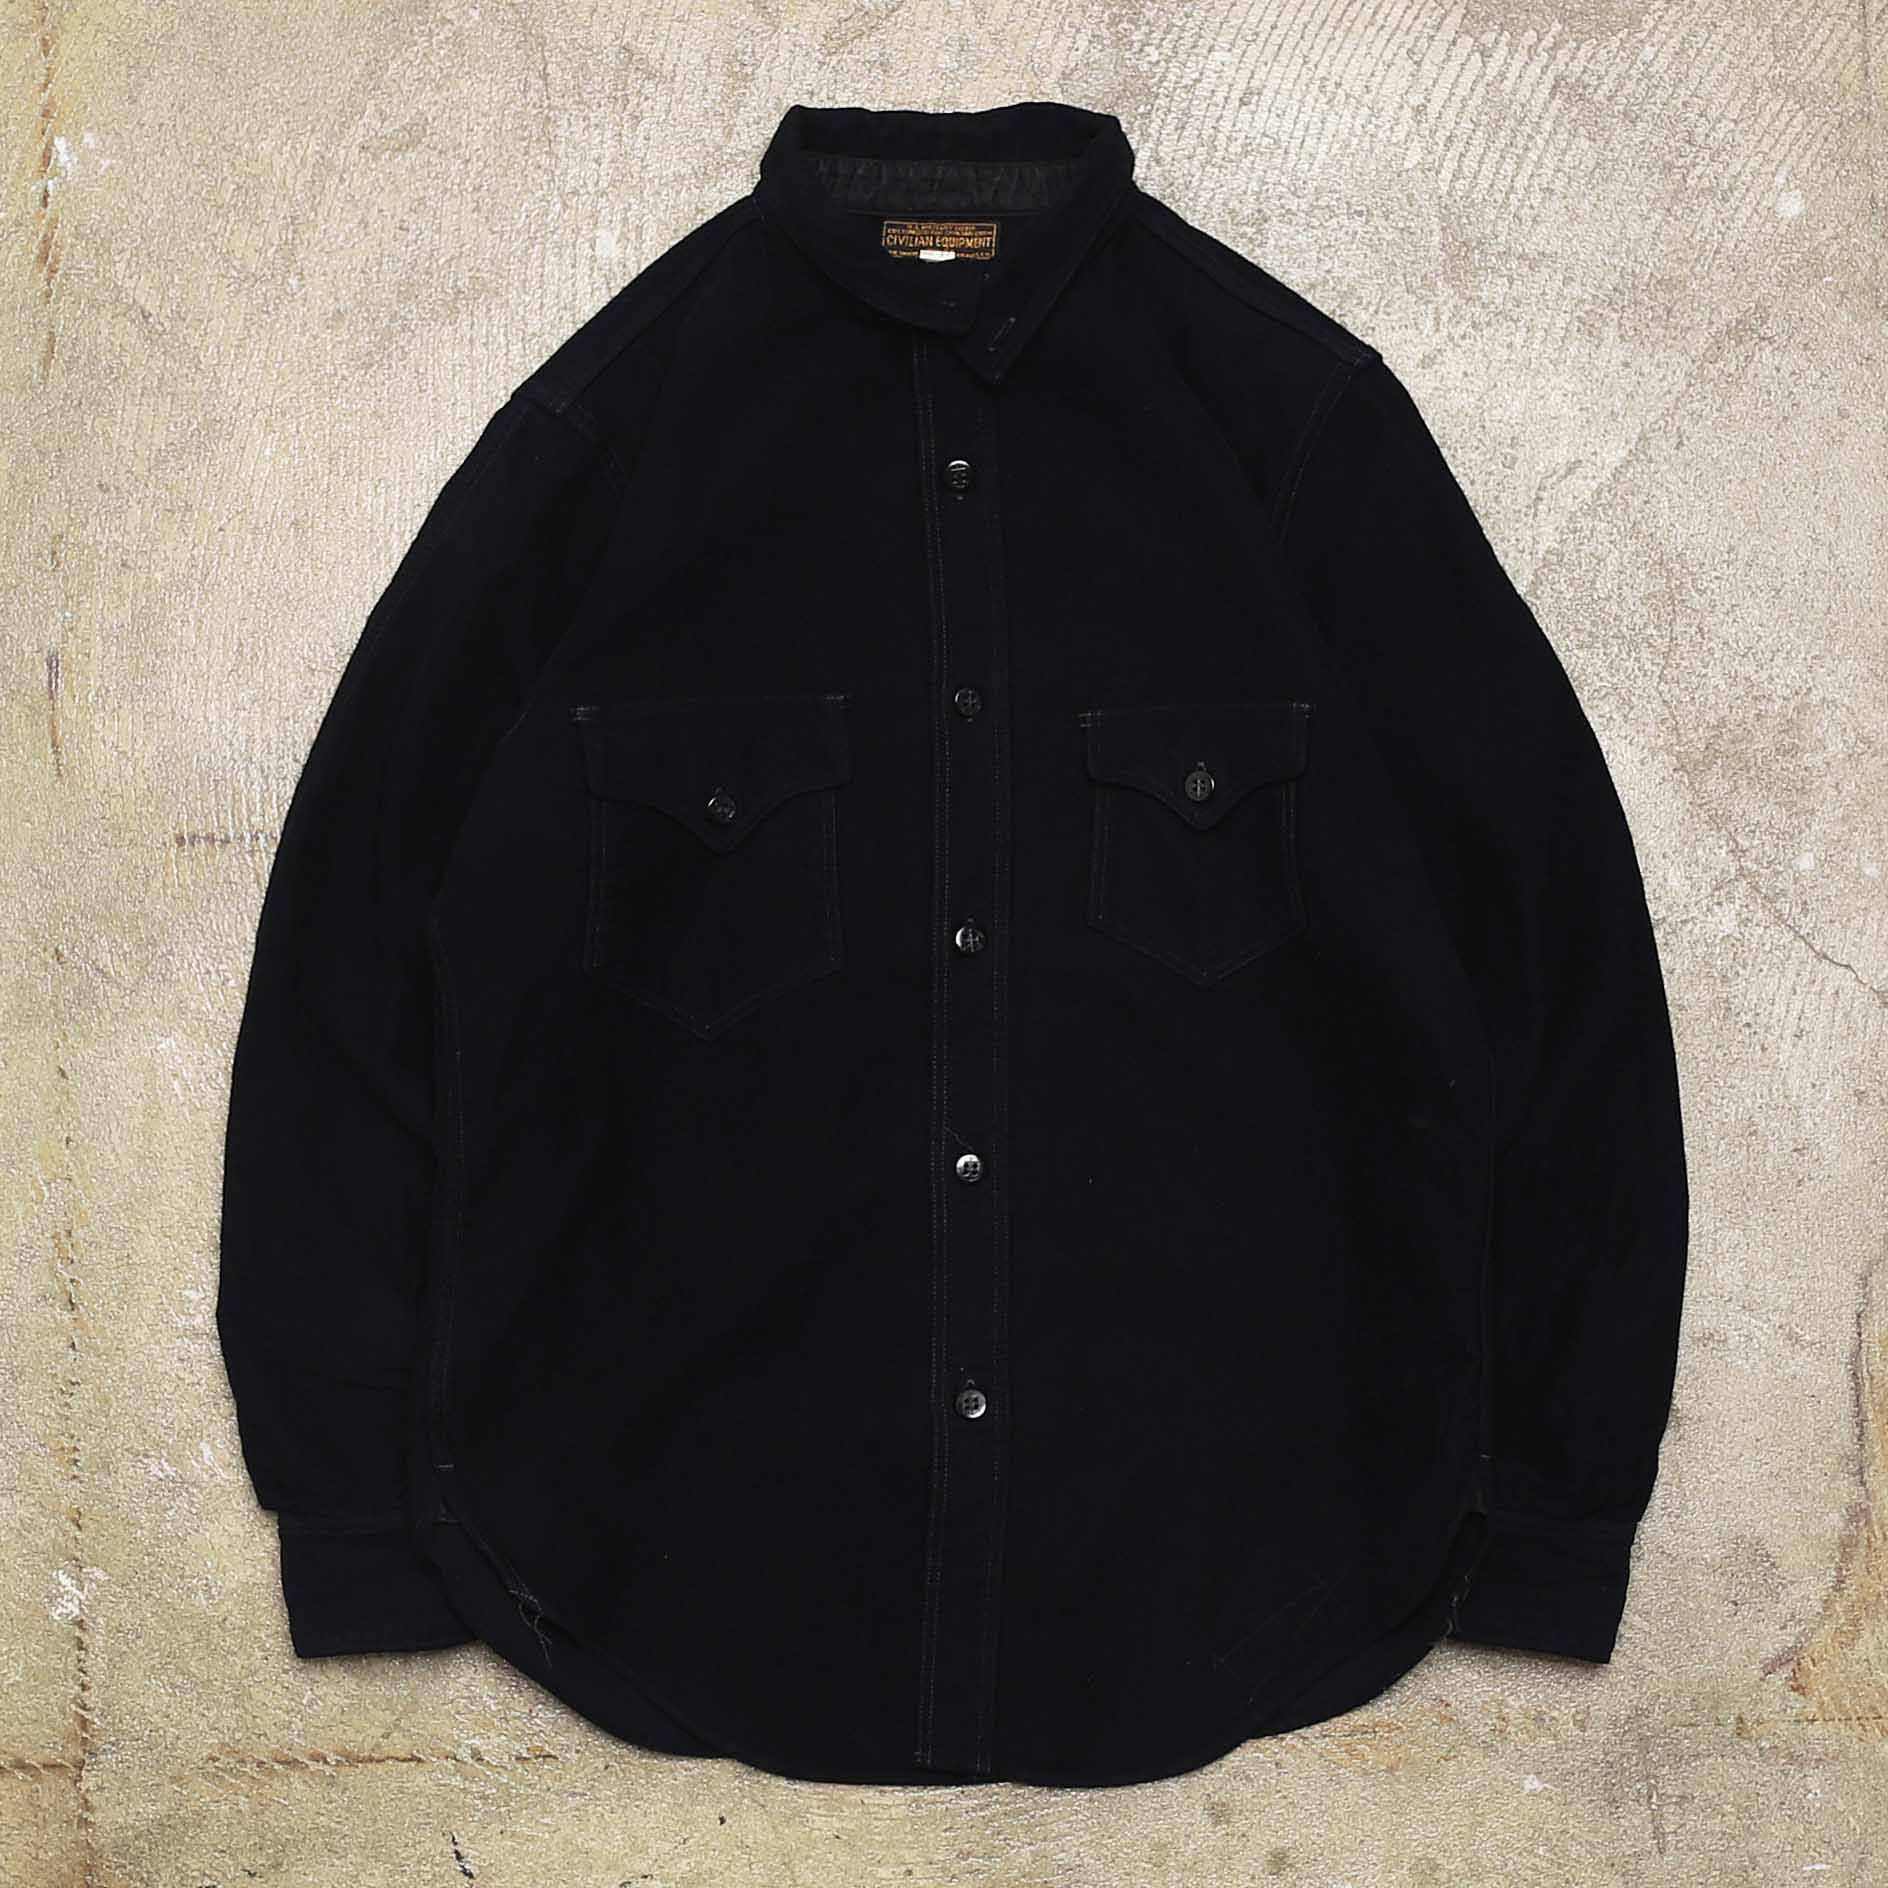 FREEWHEELERS UNION SPECIAL OVERALLS TWO POCKET WORK SHIRT - NAVY